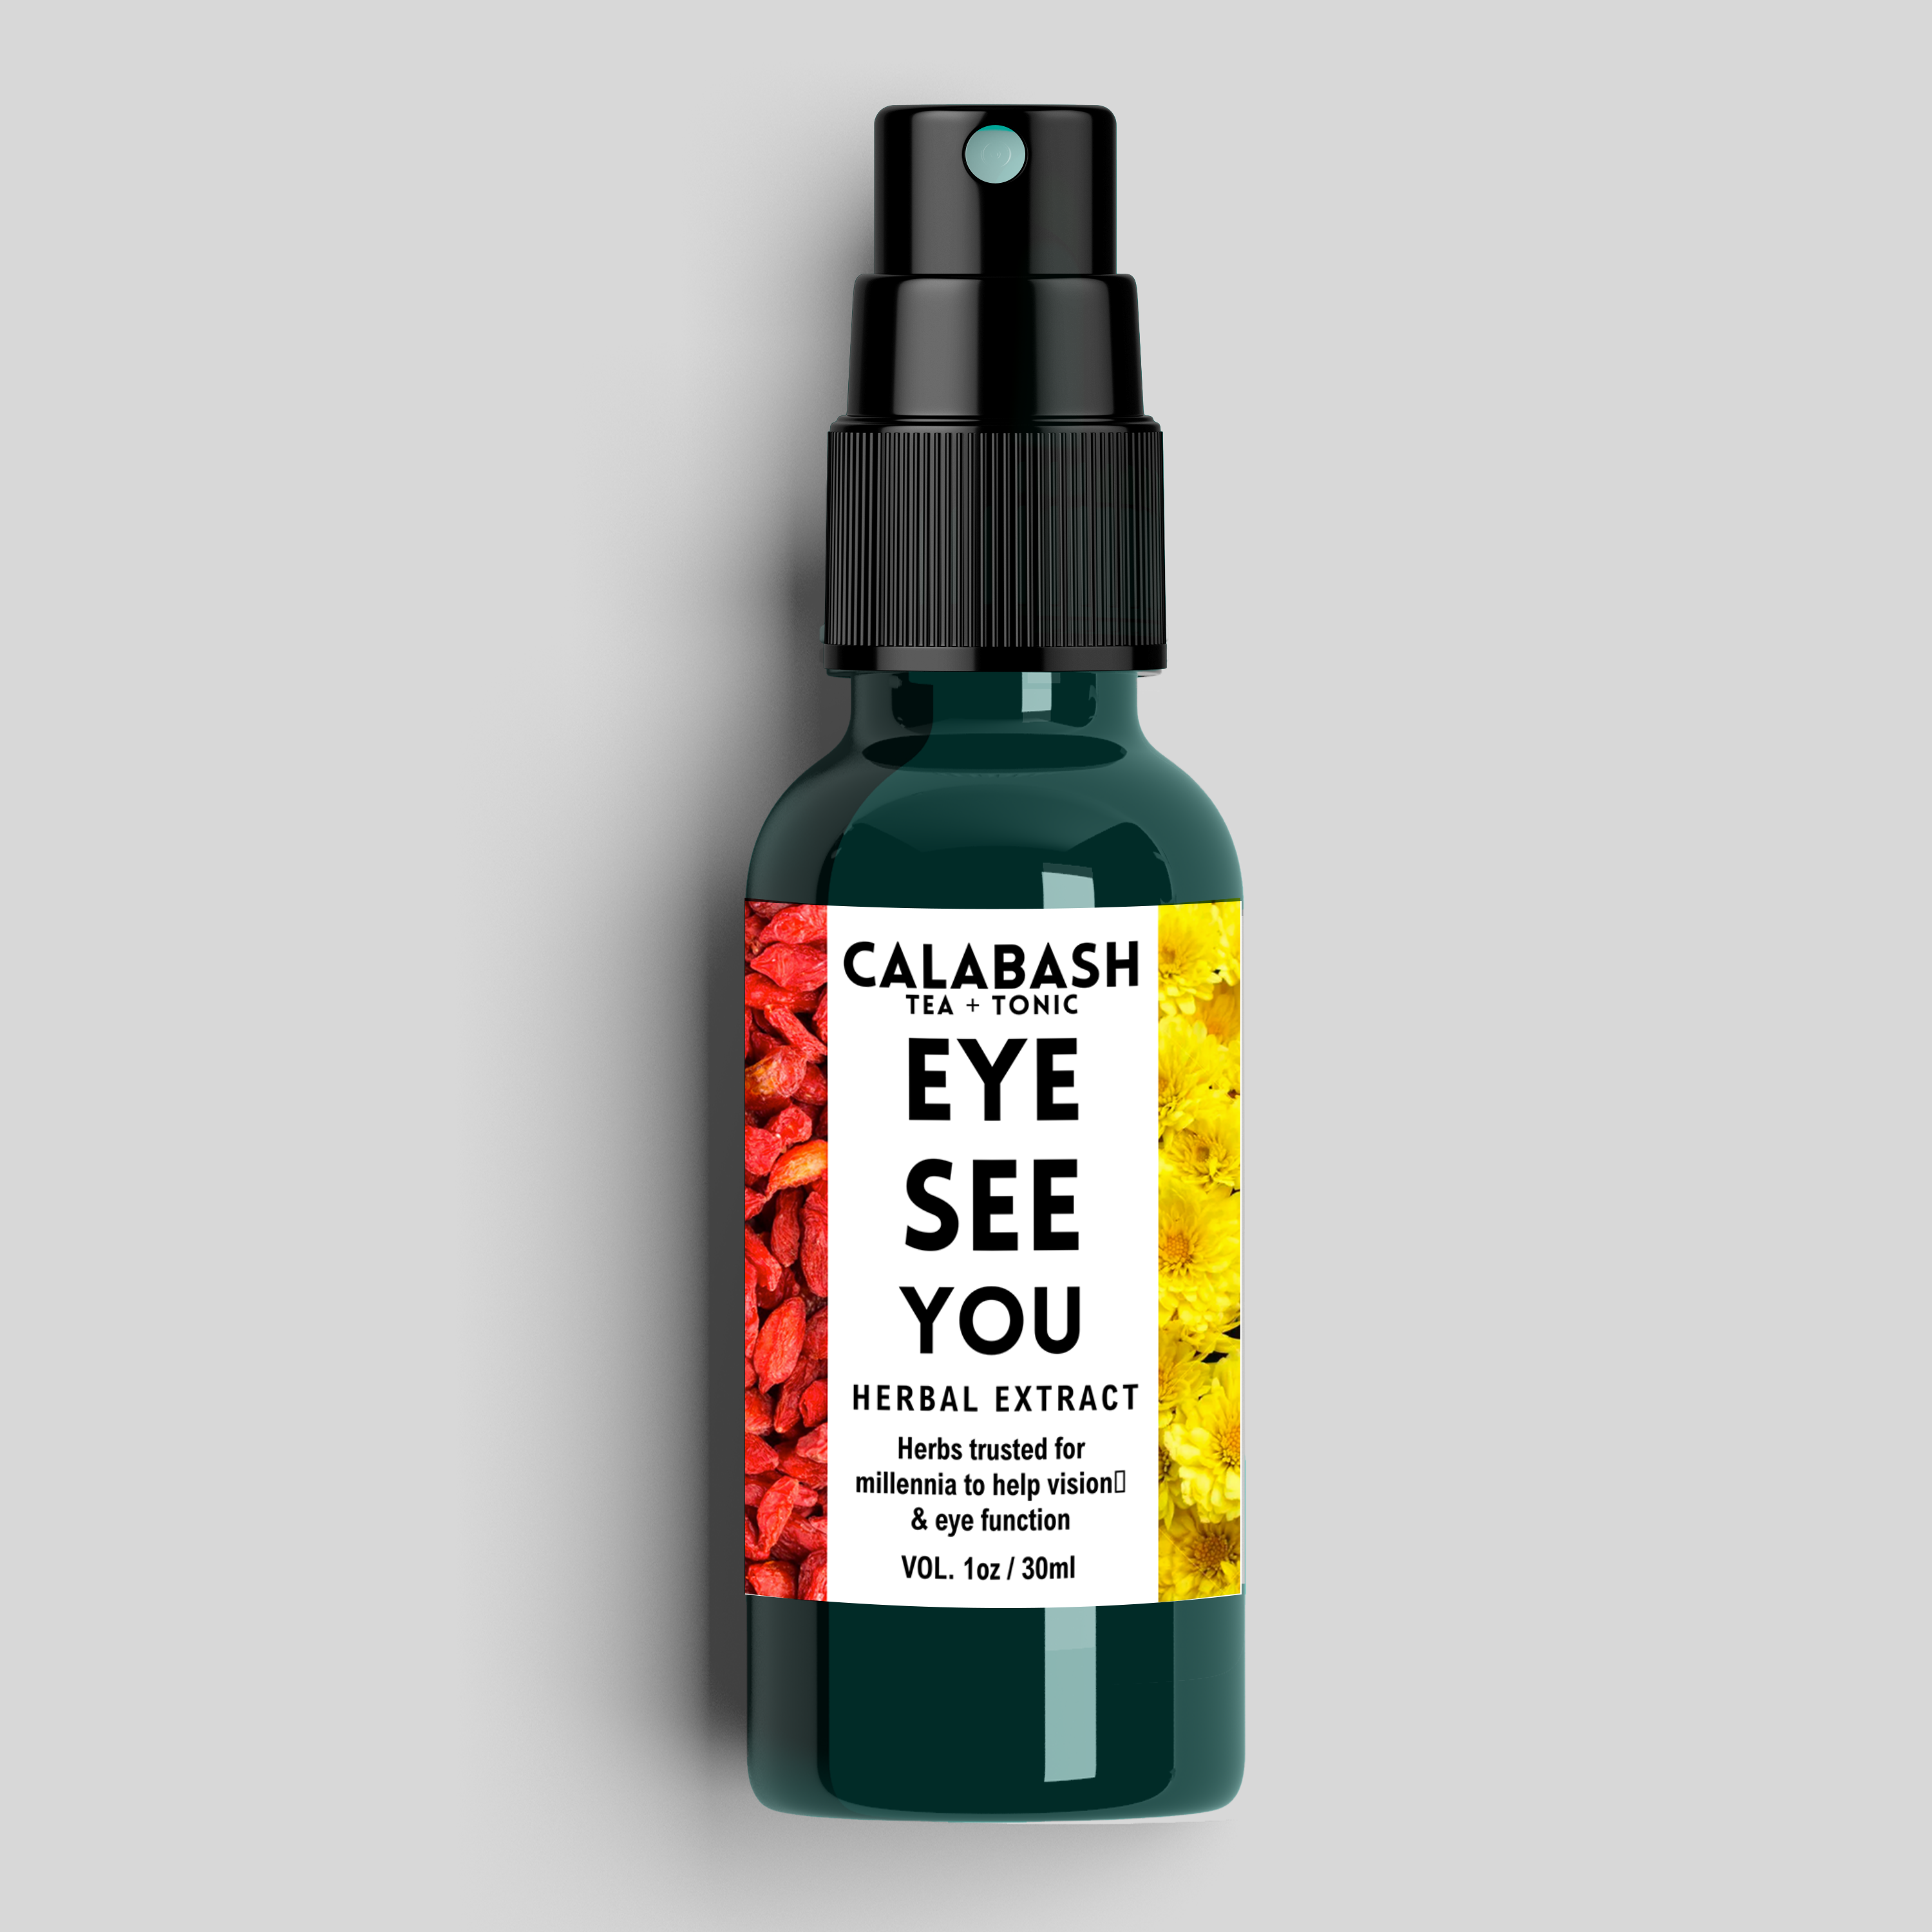 EYE SEE YOU HERBAL EXTRACT: VISION ASSIST